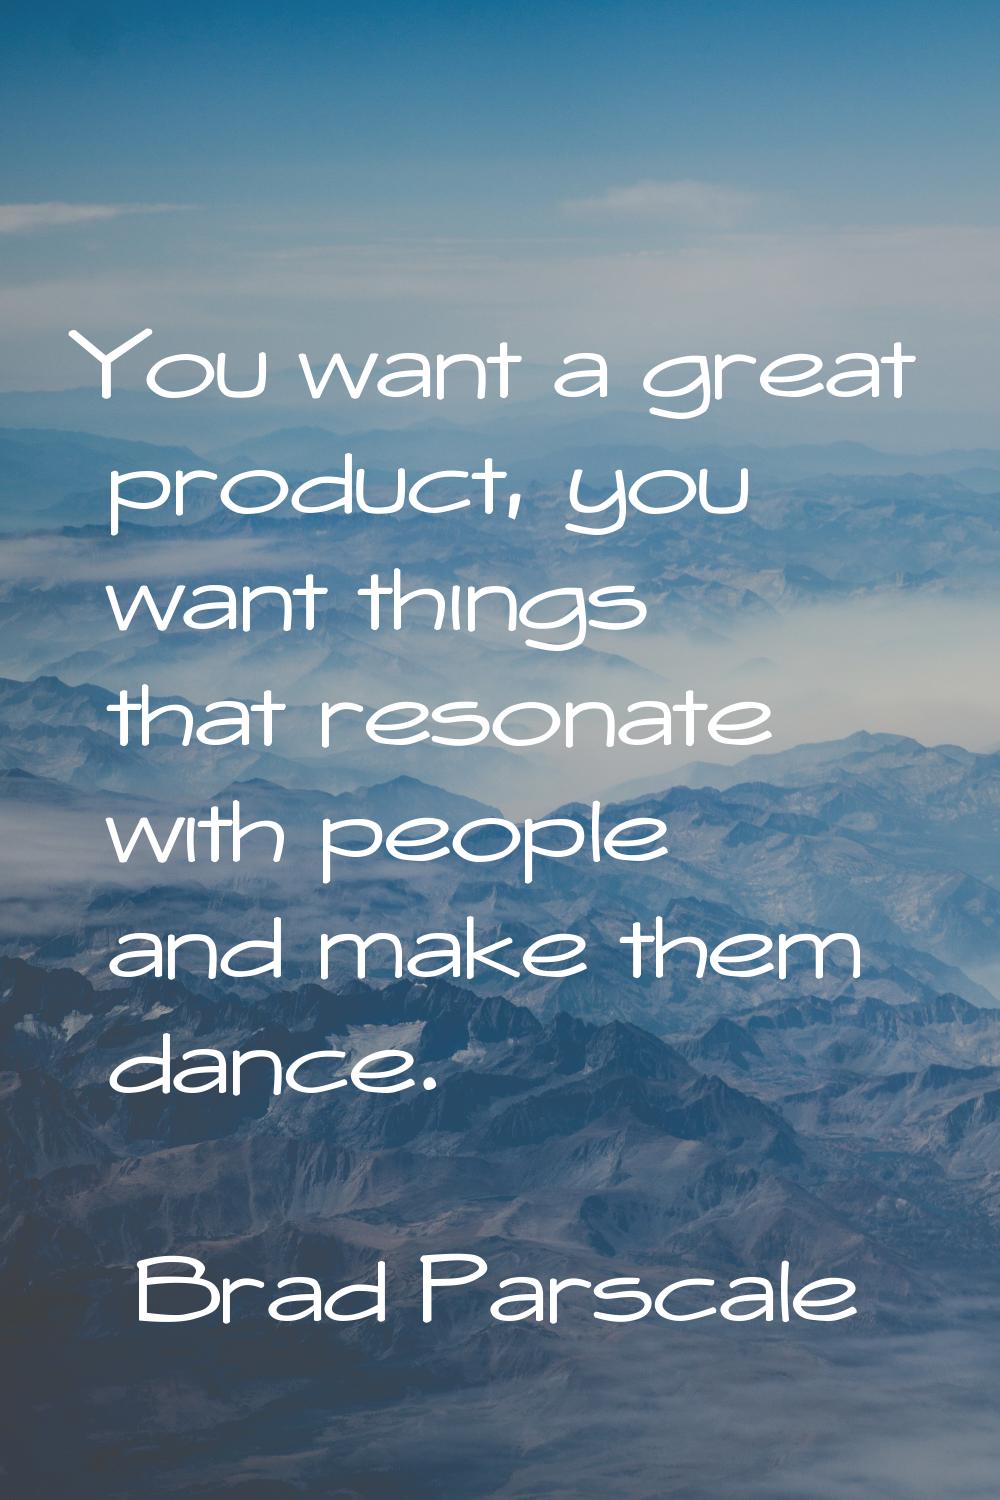 You want a great product, you want things that resonate with people and make them dance.